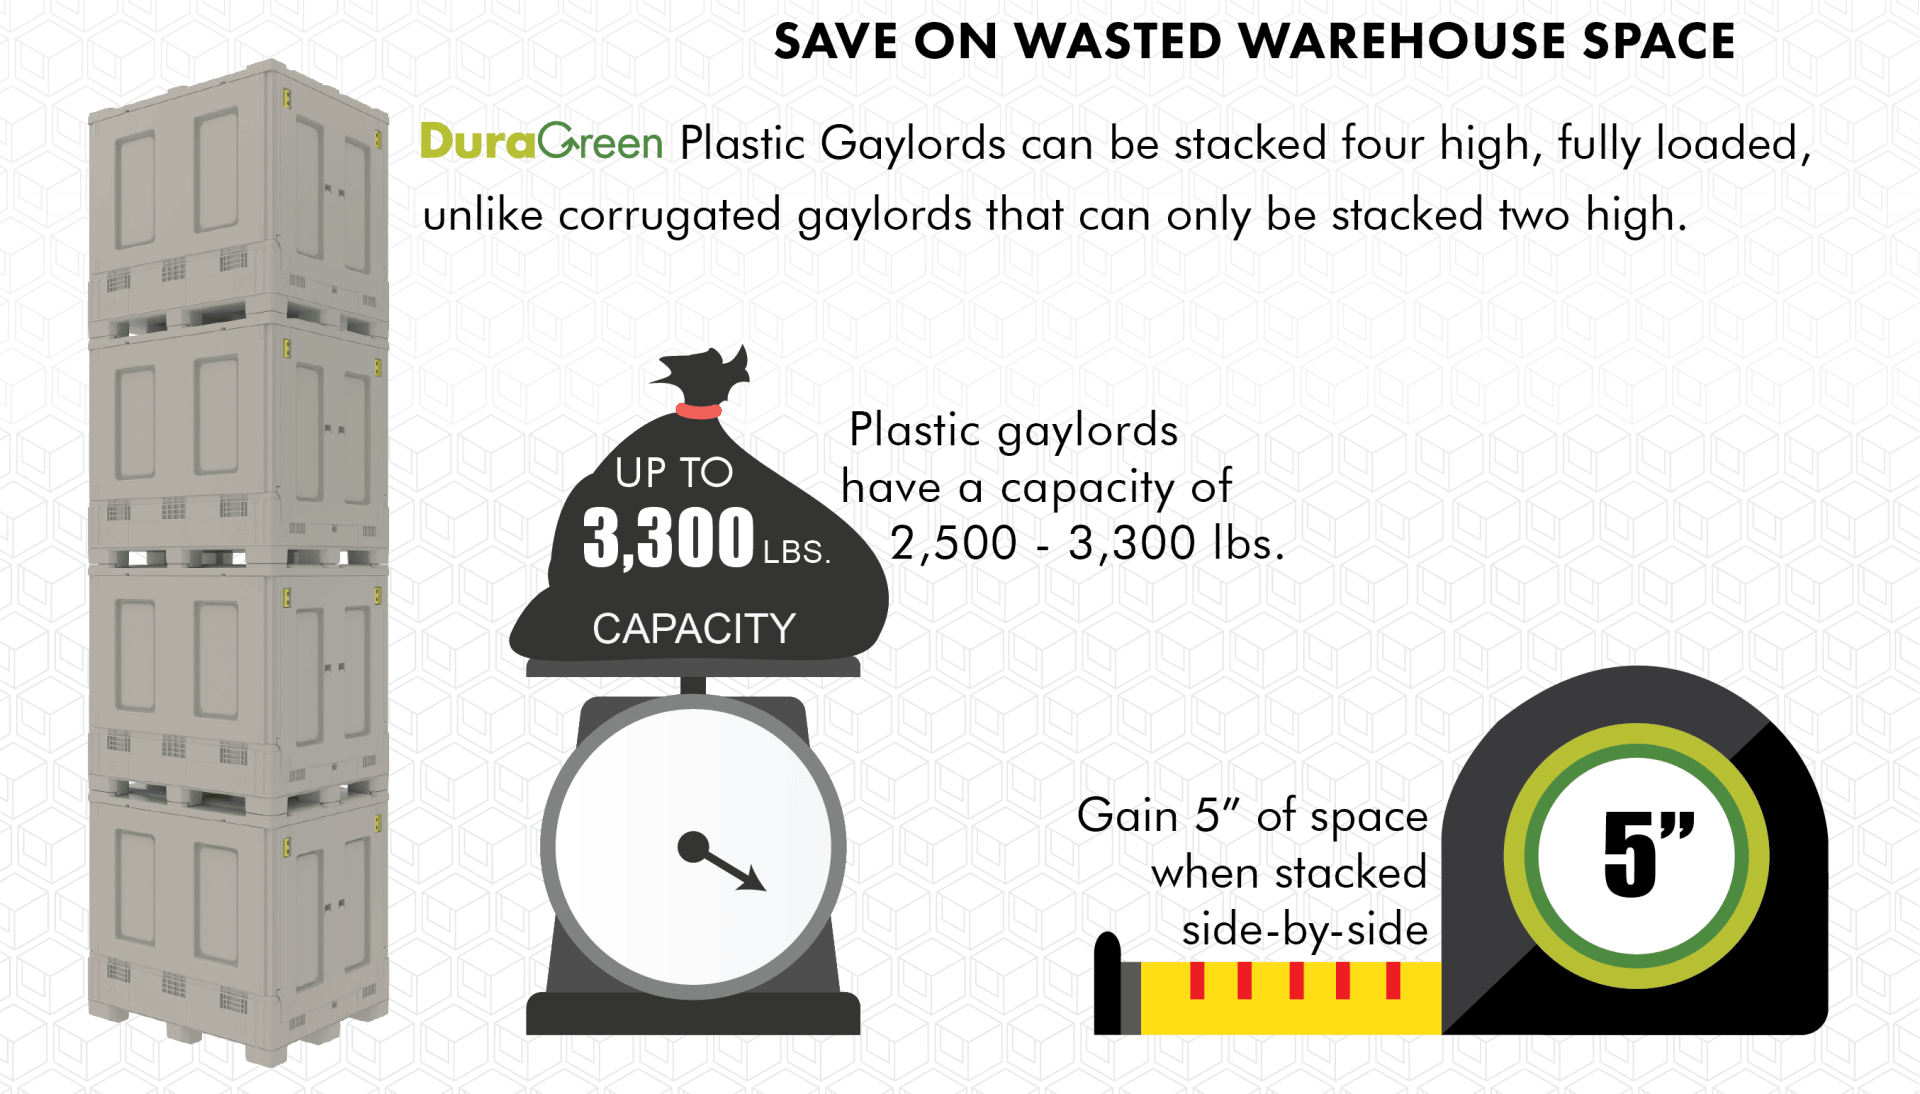 Save on warehouse space with DuraGreen Plastic Gaylords